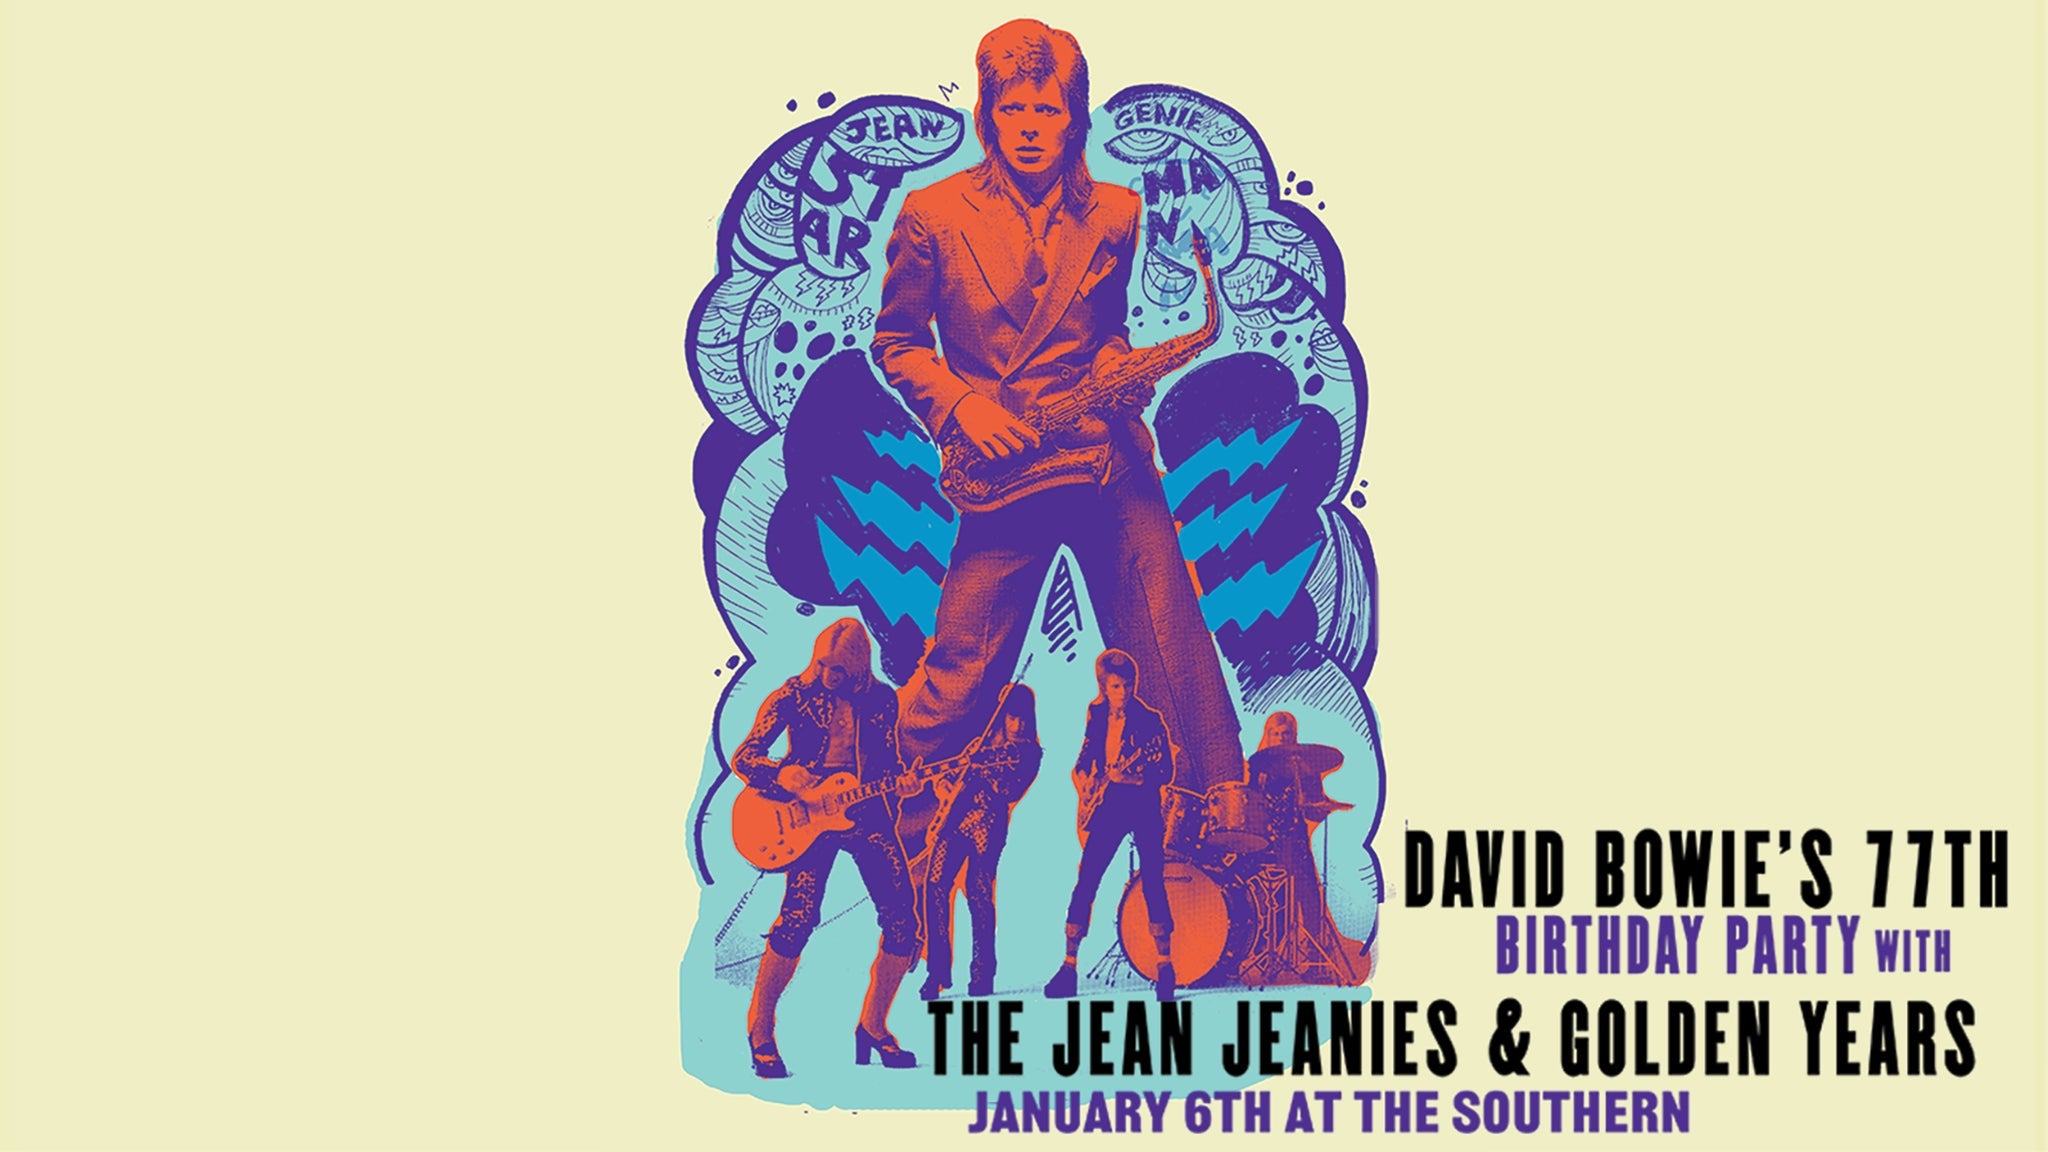 David Bowie's 77th Birthday Party with The Jean Jeanies & Golden Years